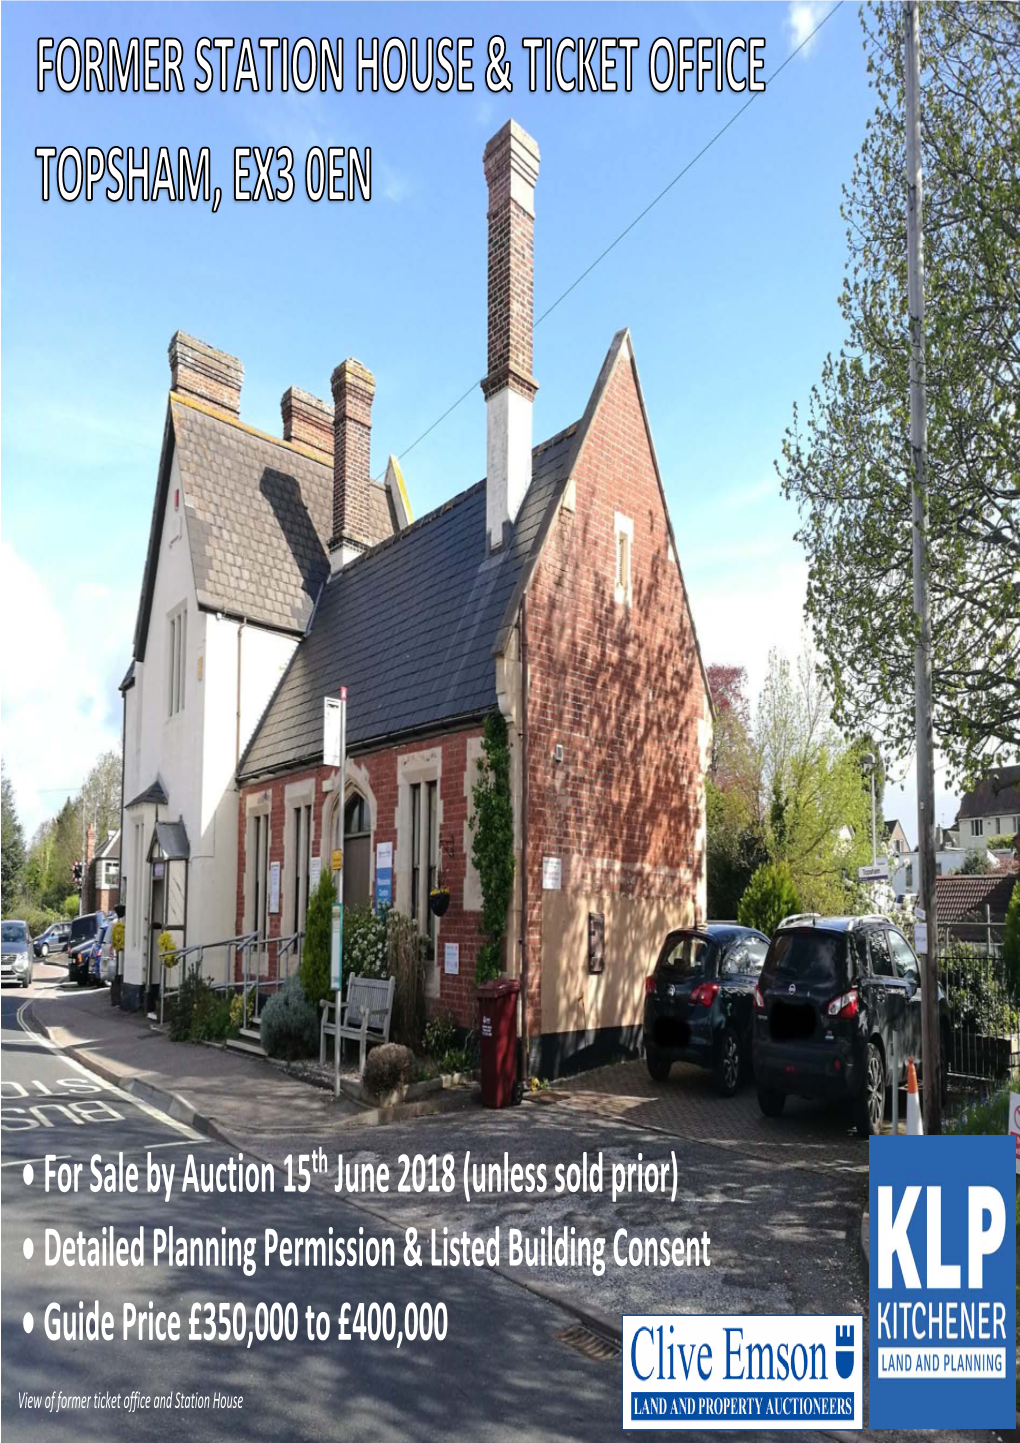 For Sale by Auction 15Th June 2018 (Unless Sold Prior) • Detailed Planning Permission & Listed Building Consent • Guide Price £350,000 to £400,000